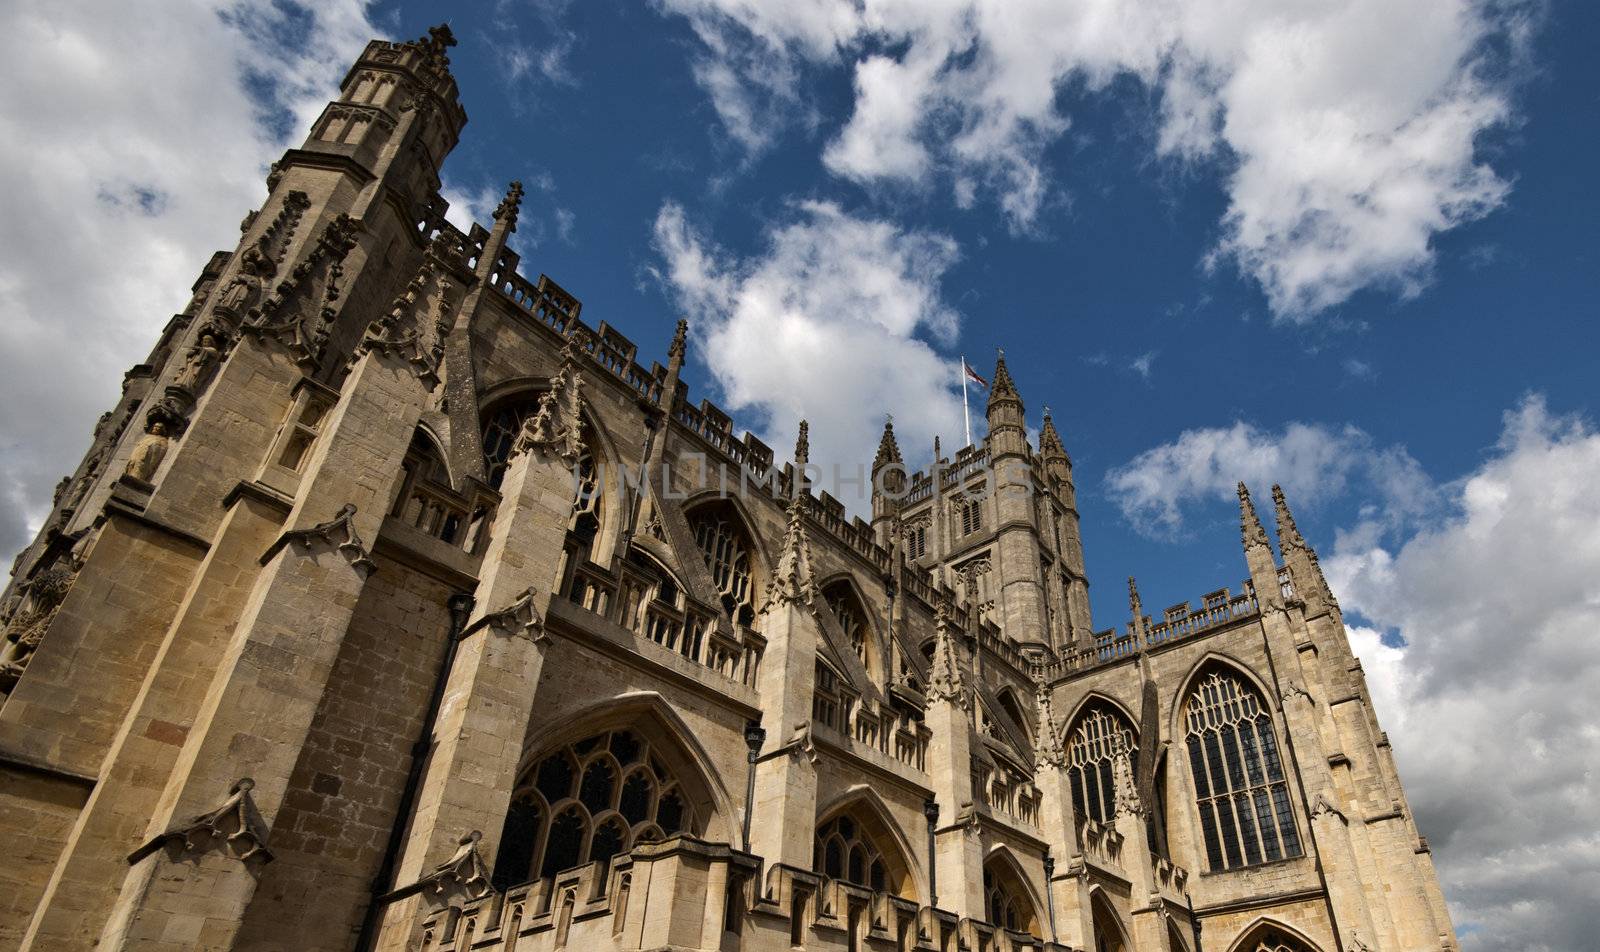 Bath abbey with blue sky and clouds above